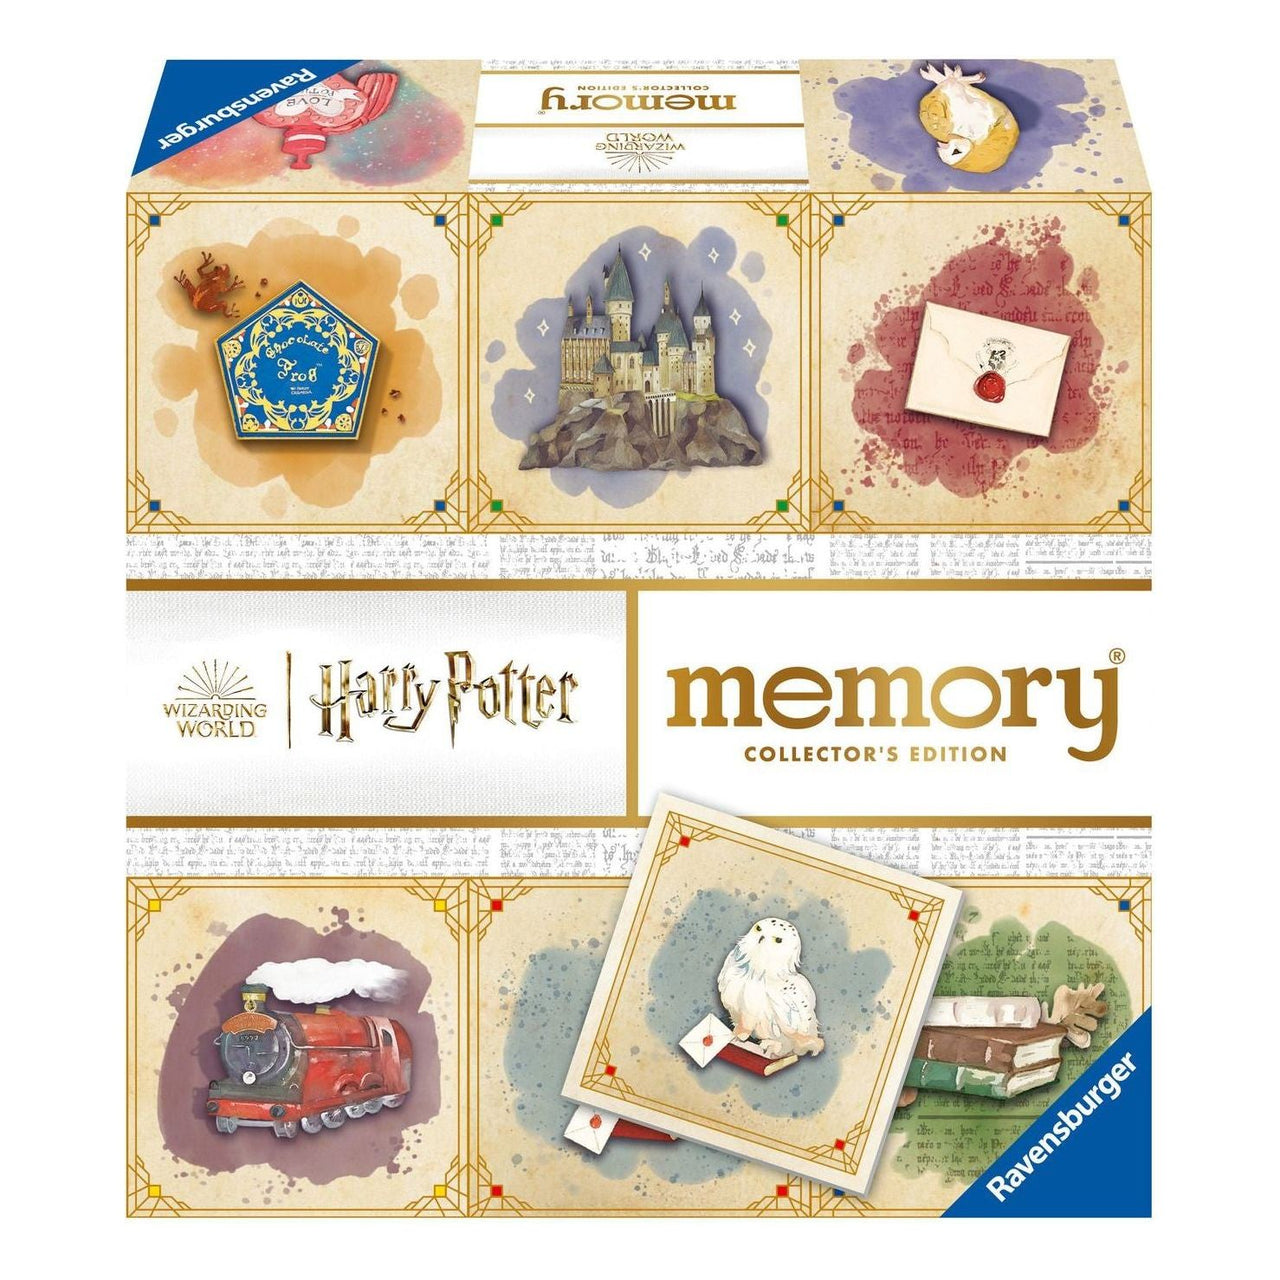 Harry Potter Collector's Edition Memory Game Ravensburger